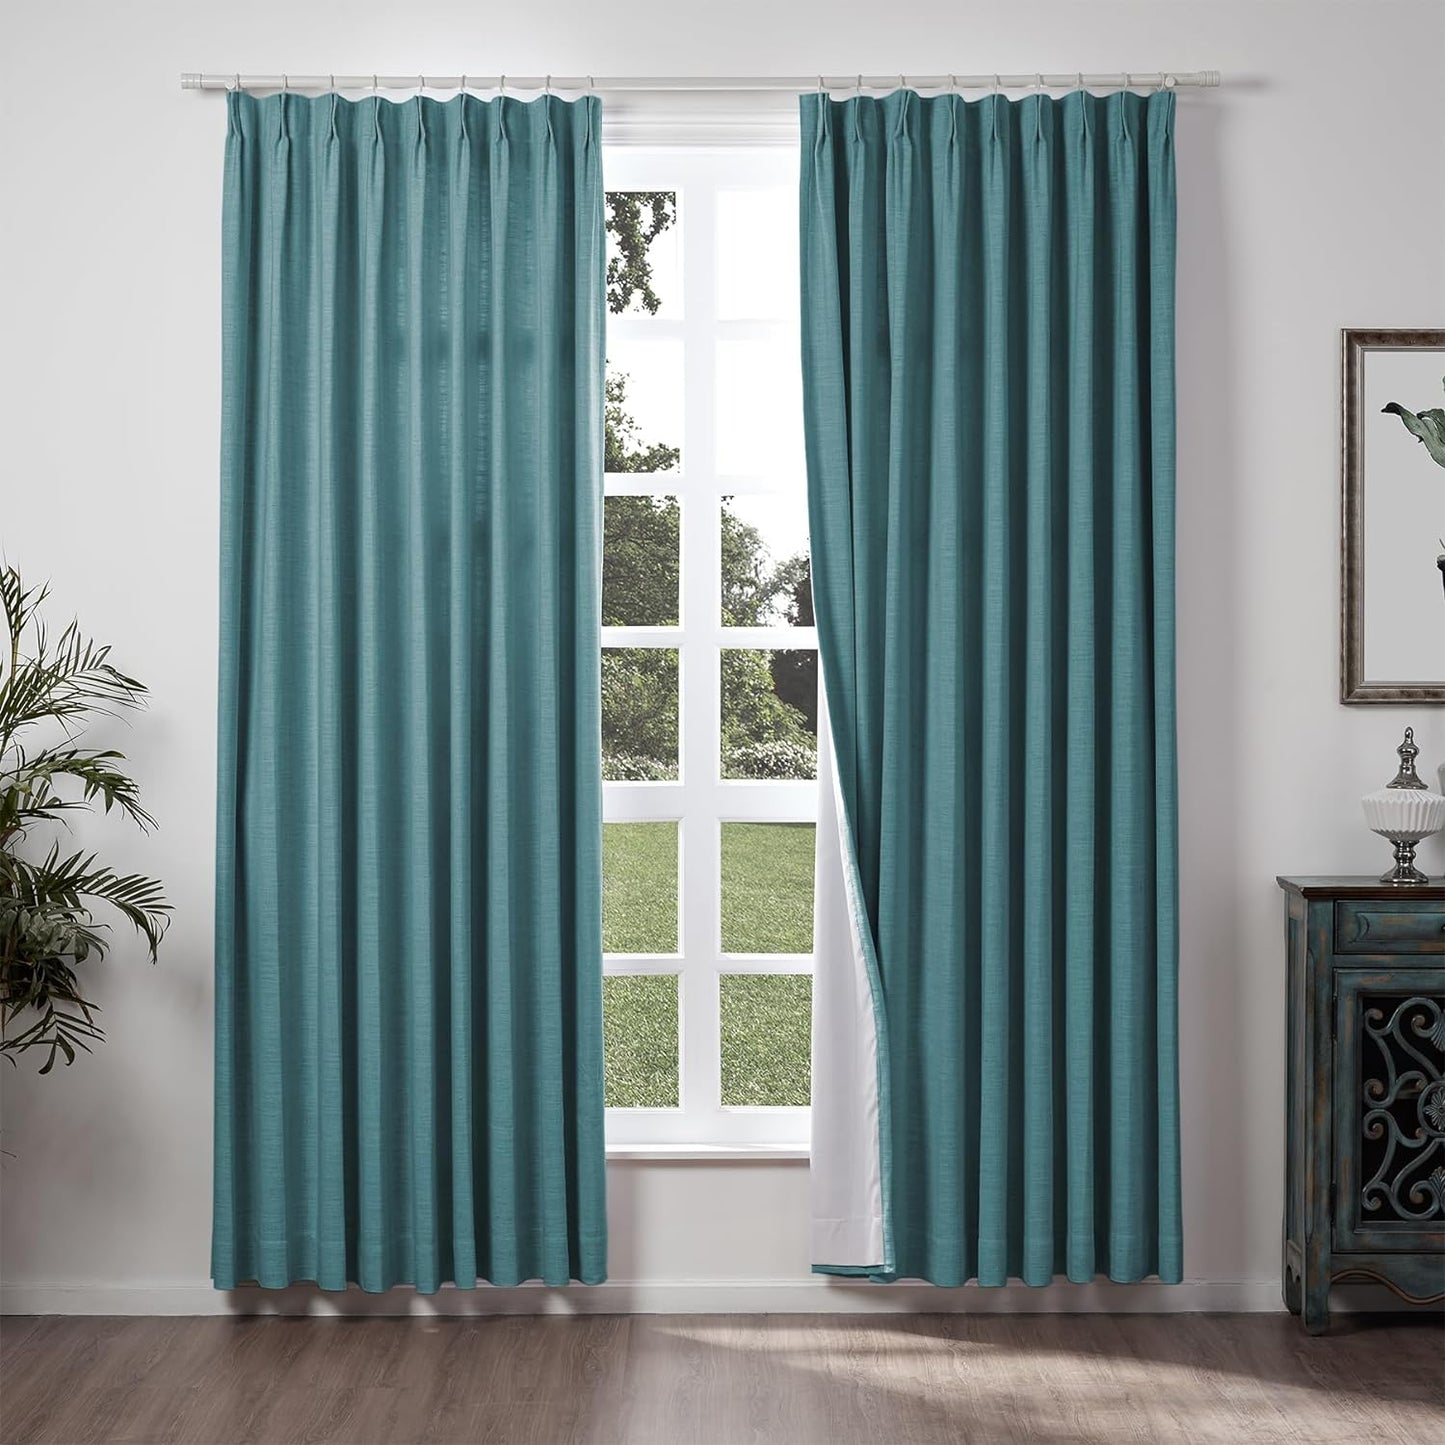 Chadmade 50" W X 84" L Polyester Linen Drape with Blackout Lining Pinch Pleat Curtain for Sliding Door Patio Door Living Room Bedroom, (1 Panel) Beige White Liz Collection  ChadMade Everglade Teal (34) 120Wx96L 